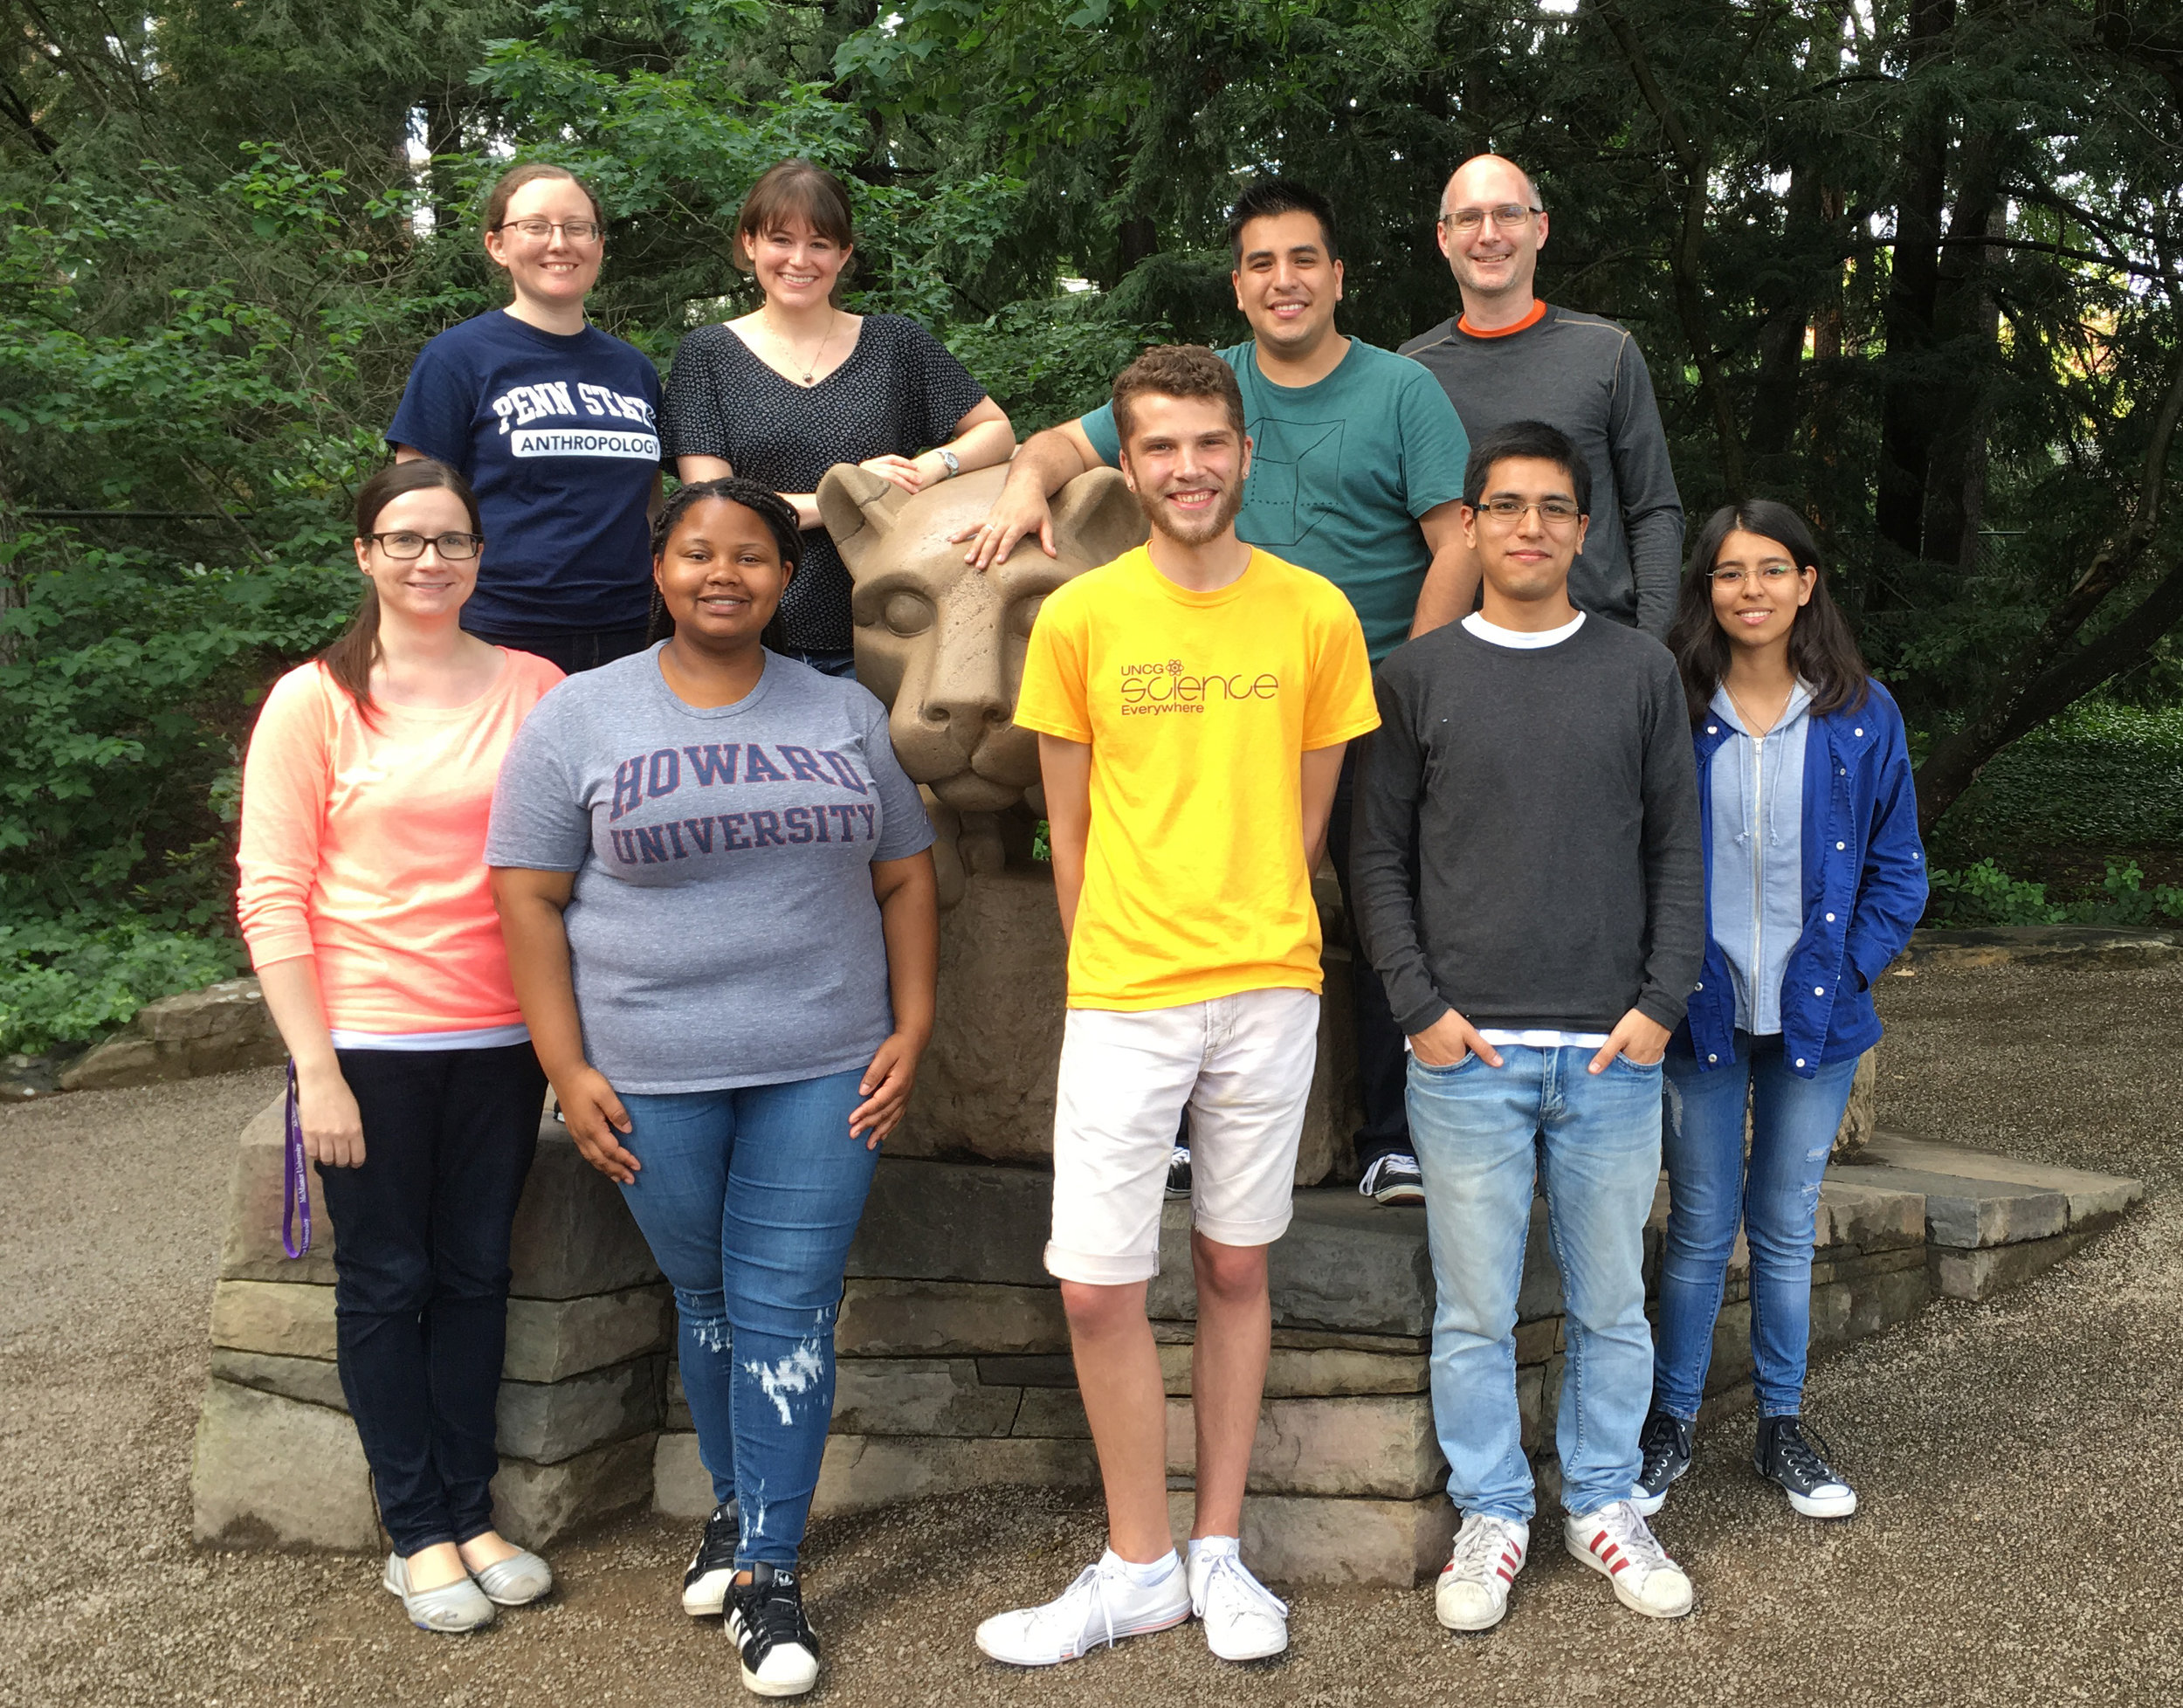  Perry lab members with three students from Peru (Eduardo Gushiken Ibanez, Ana Paula Vargas Ruiz, and Alejandro Ortigas Vasquez) and Summer Research Opportunities Program student NaTazah O'Neill who was visiting us from Howard University, during a su